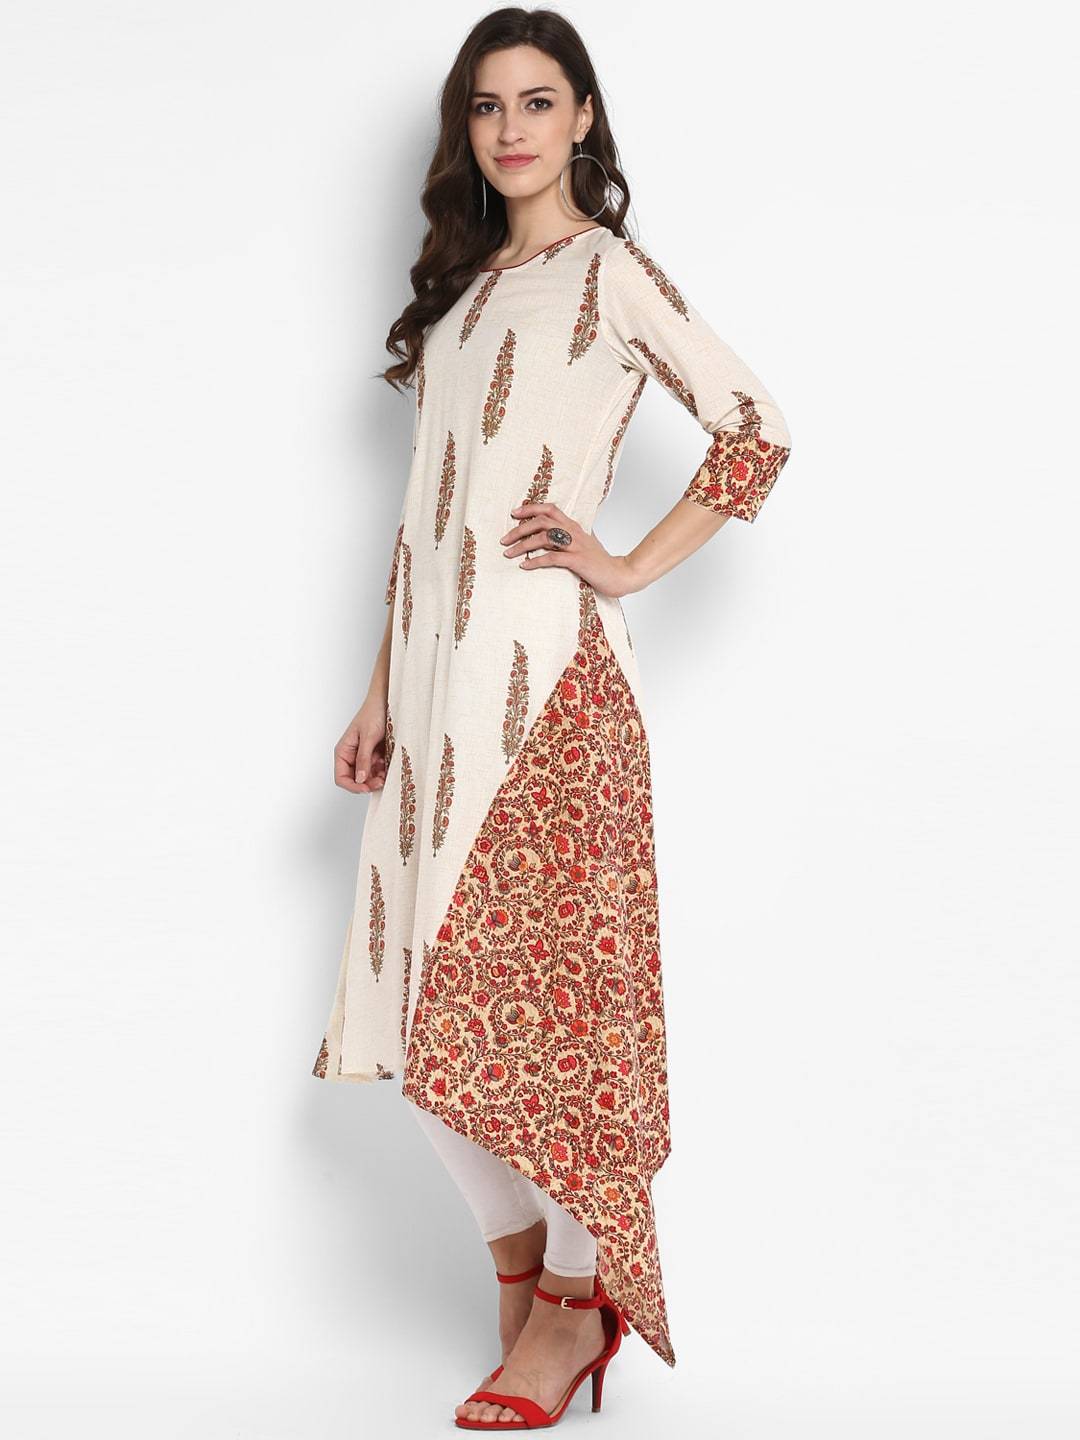 Women's Off-White & Red Floral Printed A-Line Kurta - Meeranshi